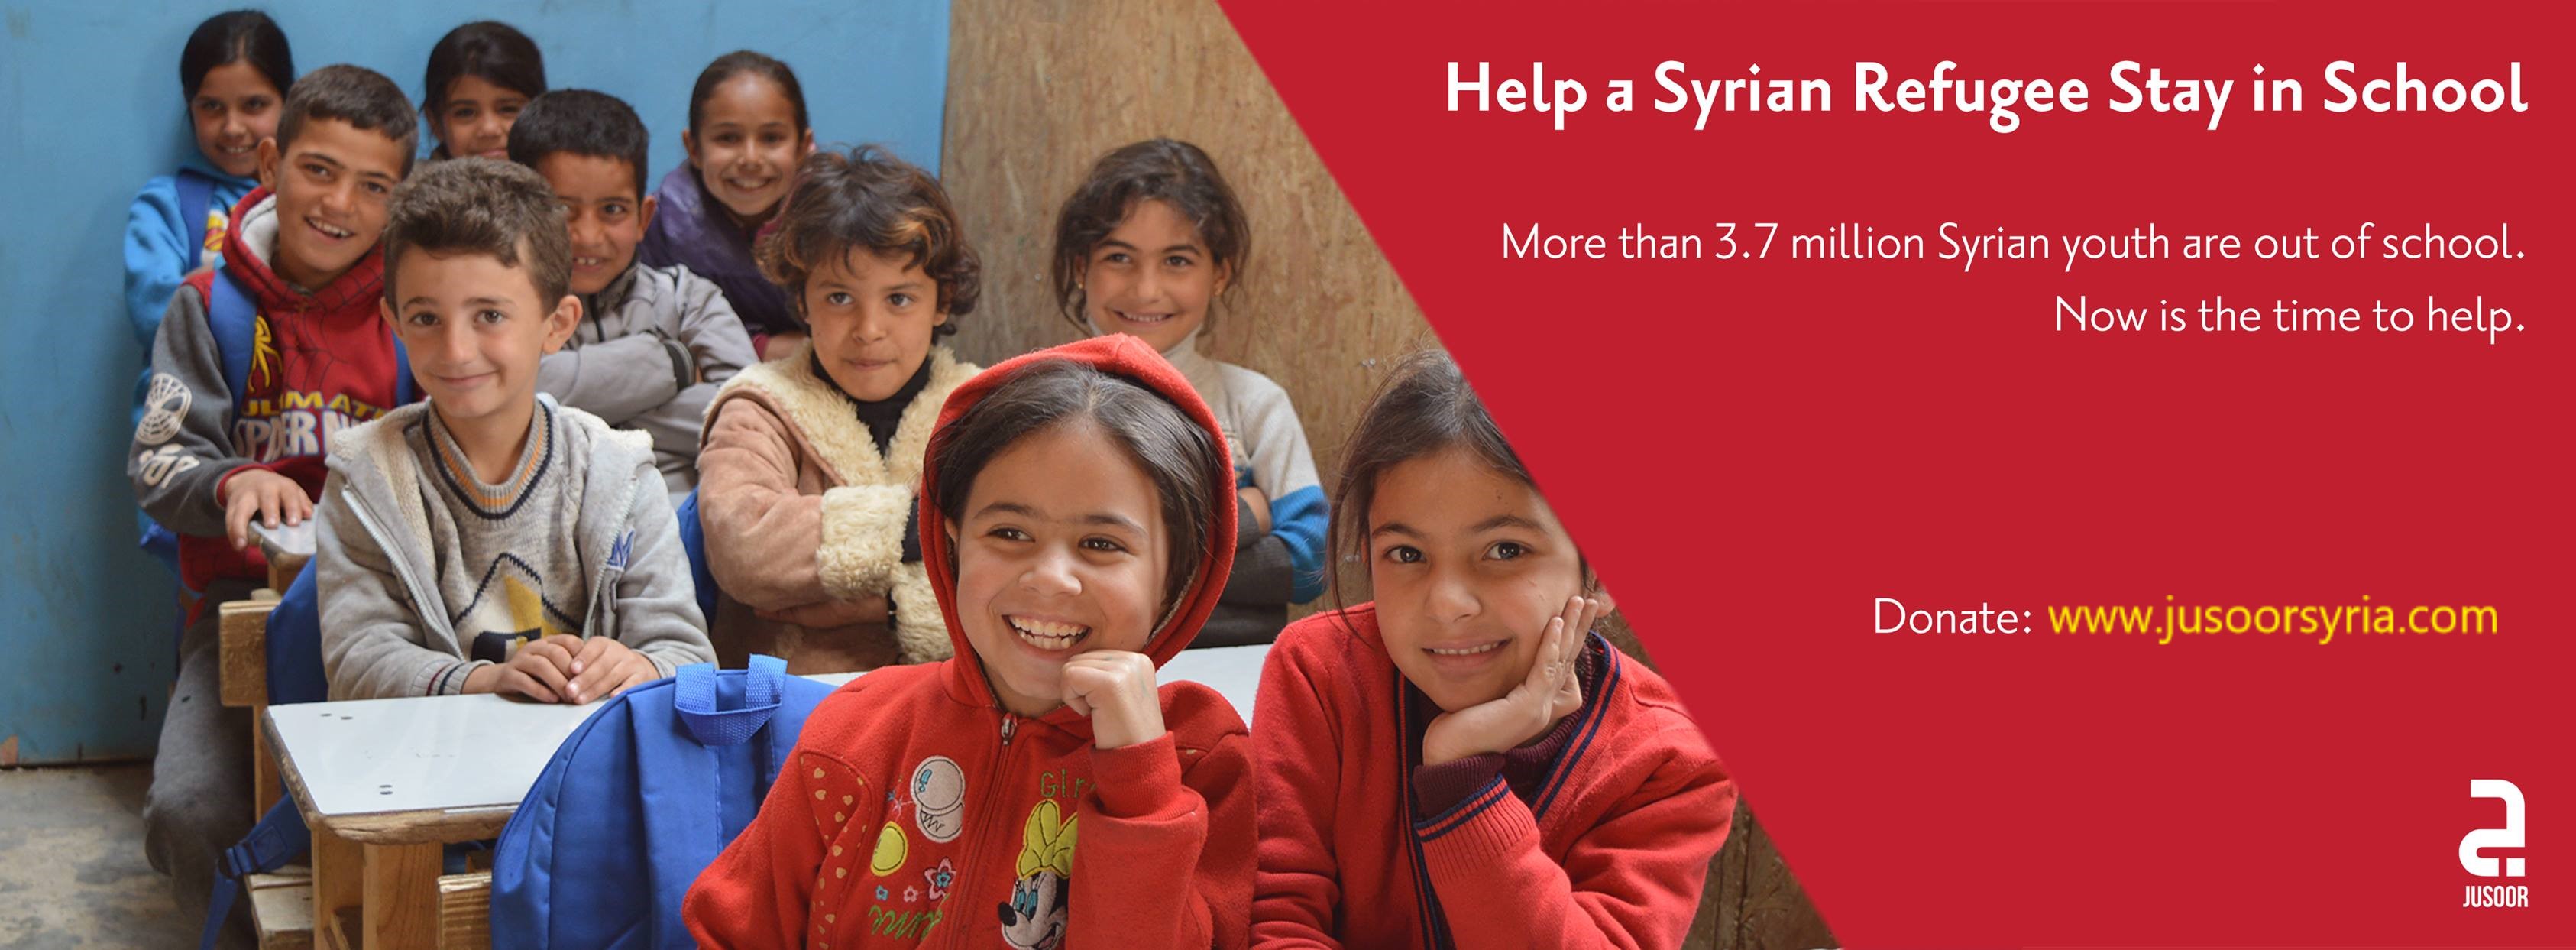 Help Educate a Syrian Child